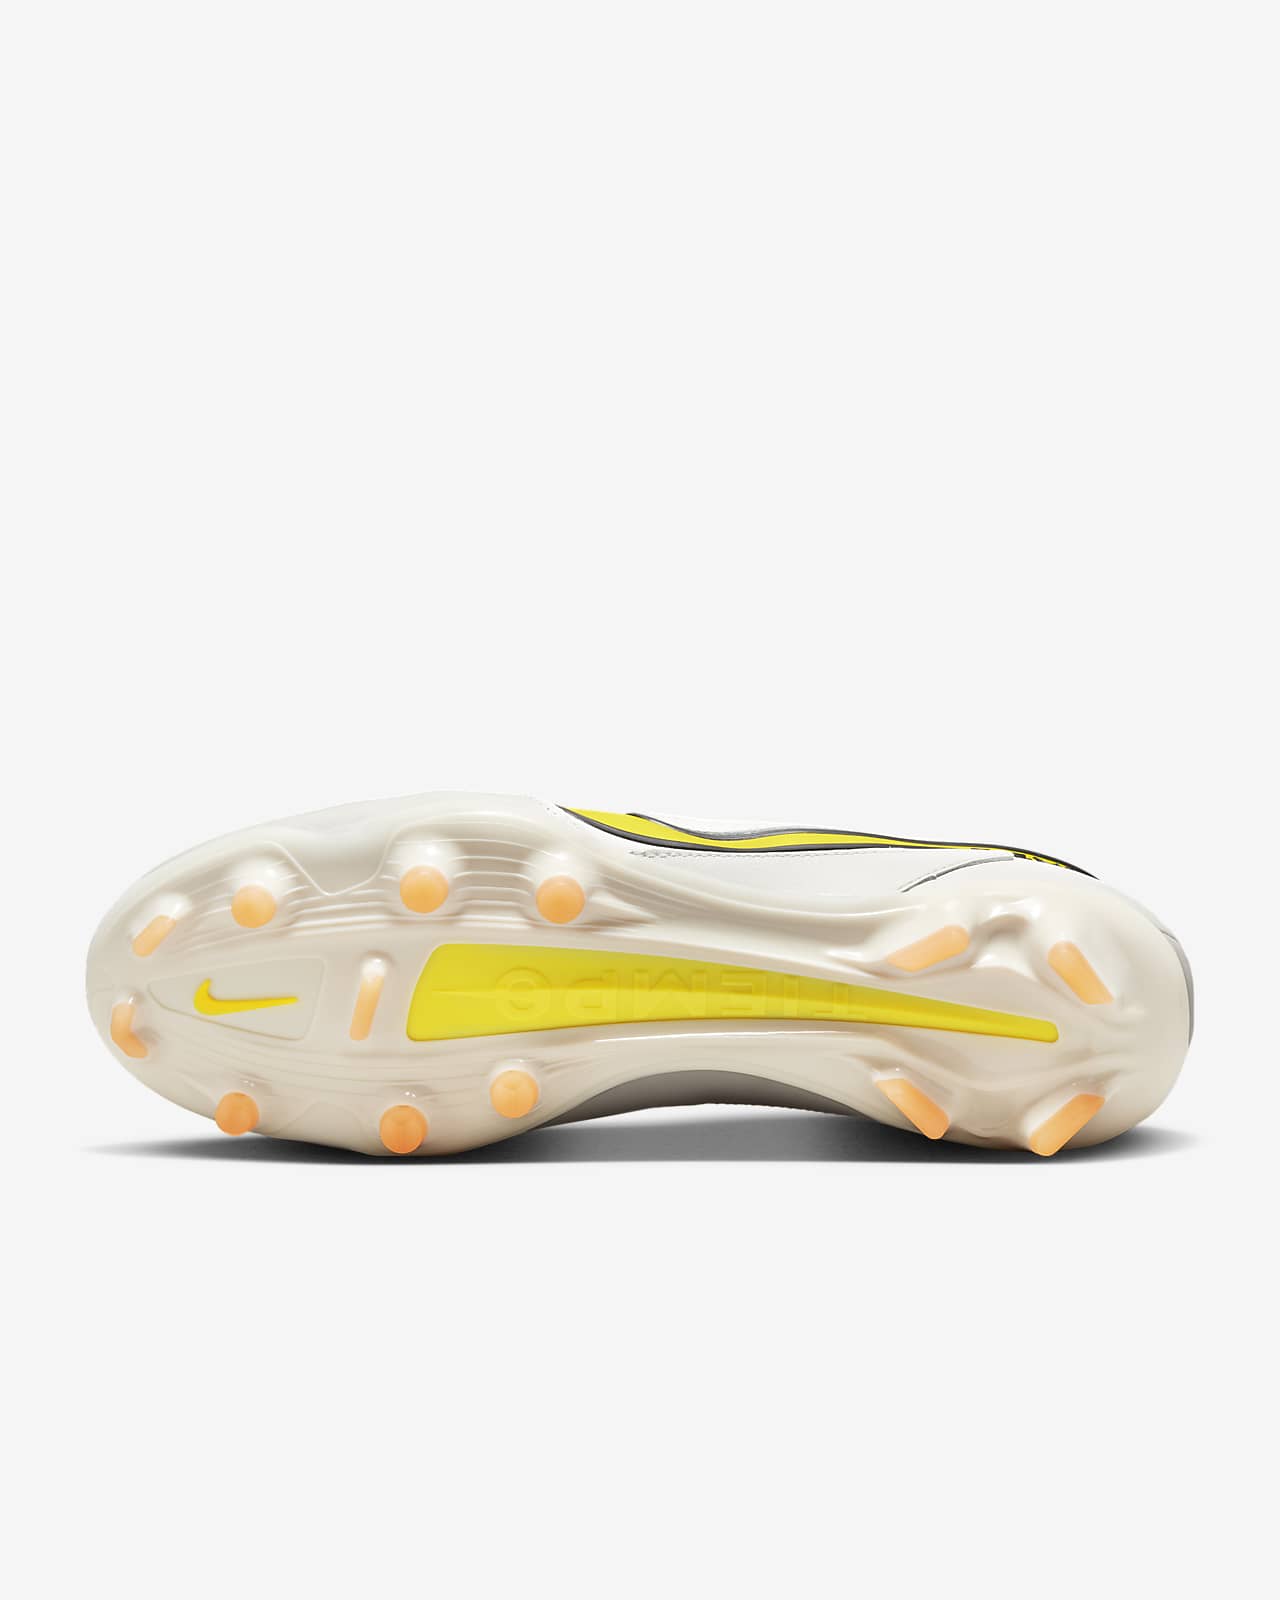 Nike Tiempo Legend 9 Pro Firm-Ground Soccer Cleat. Nike.com